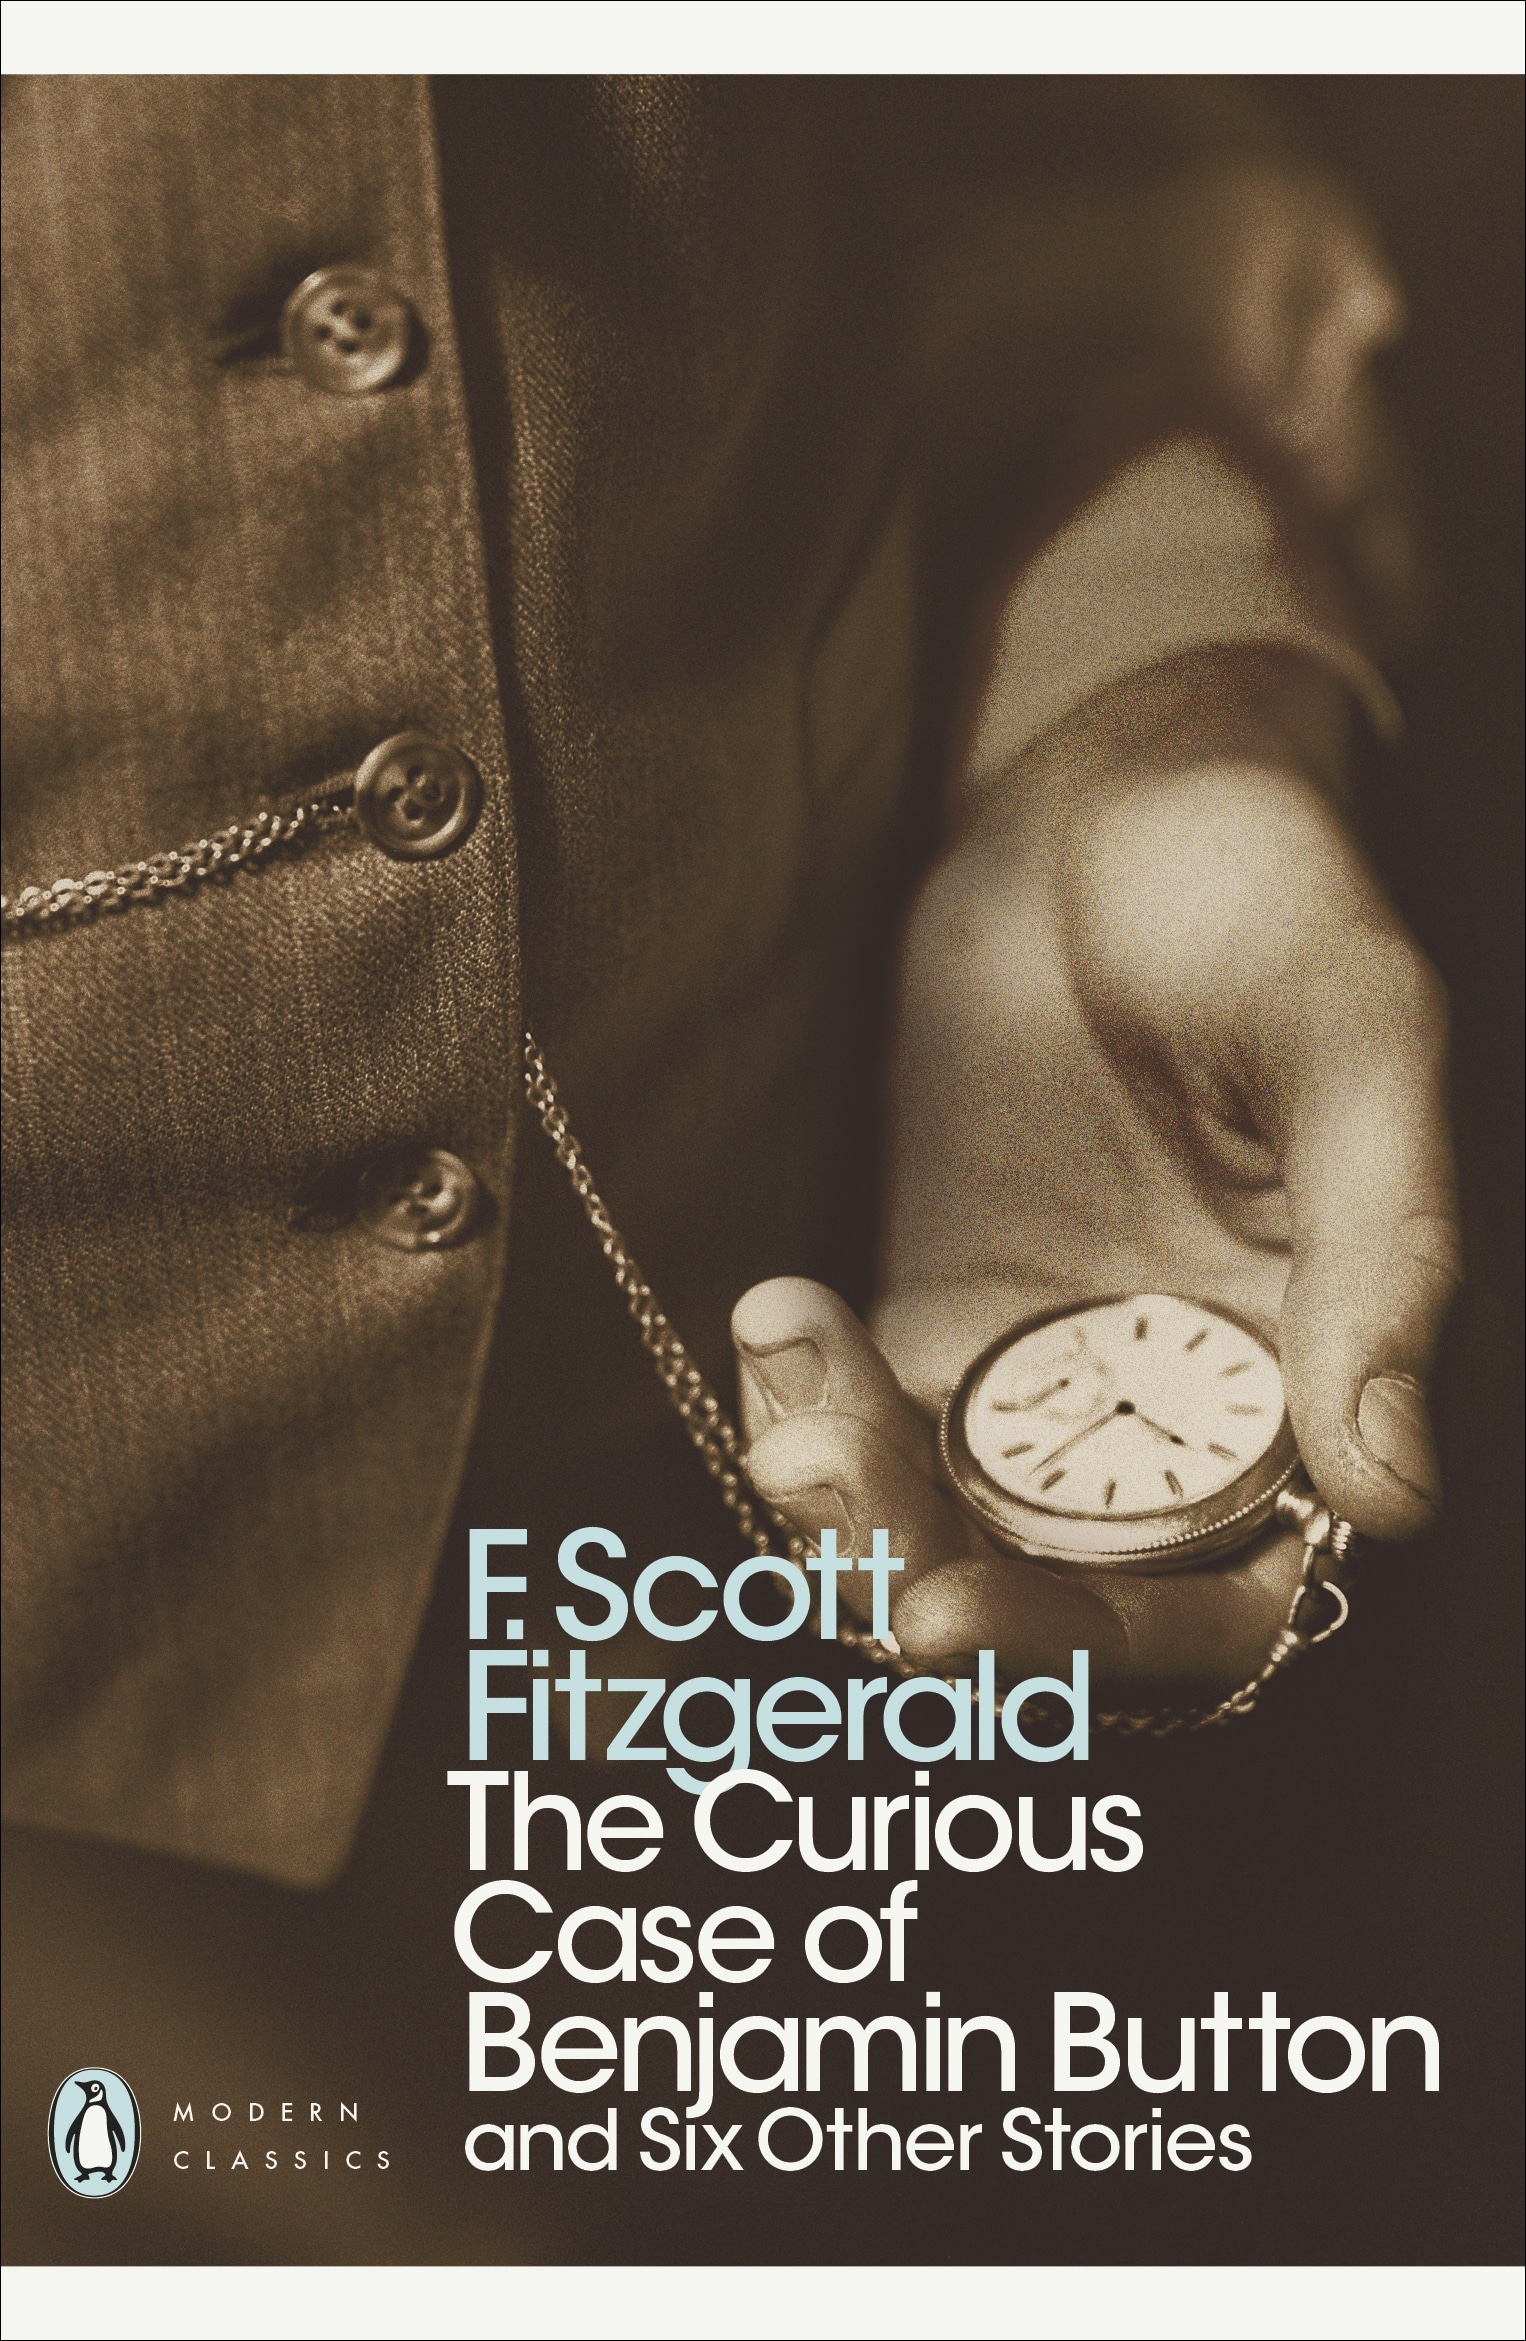 Book “The Curious Case of Benjamin Button” by F. Scott Fitzgerald — November 27, 2008